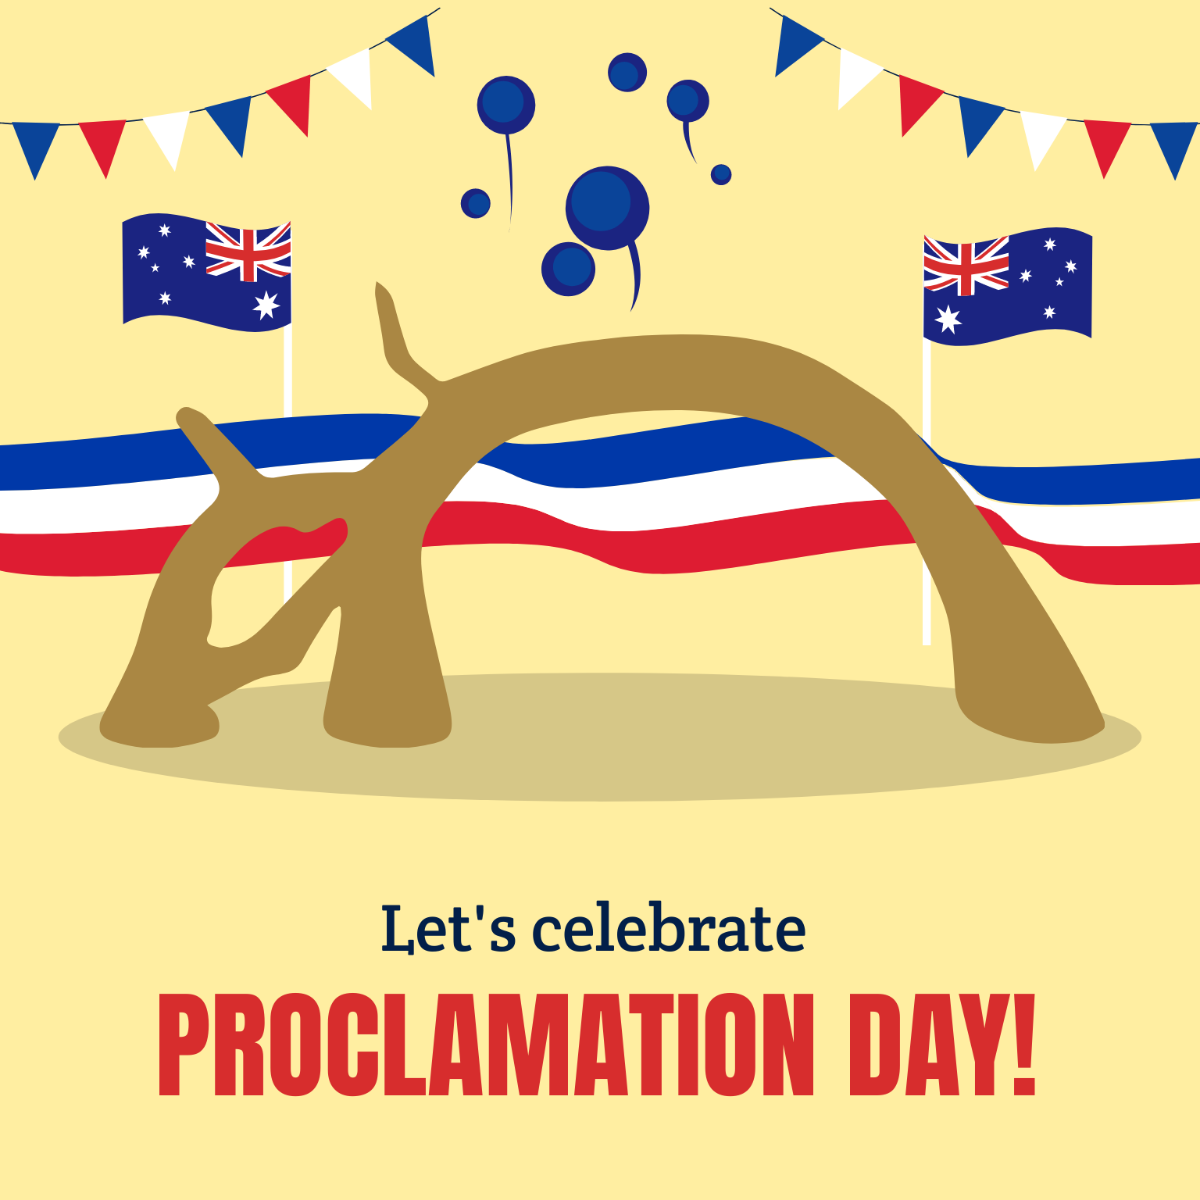 Free Proclamation Day Celebration Vector Template